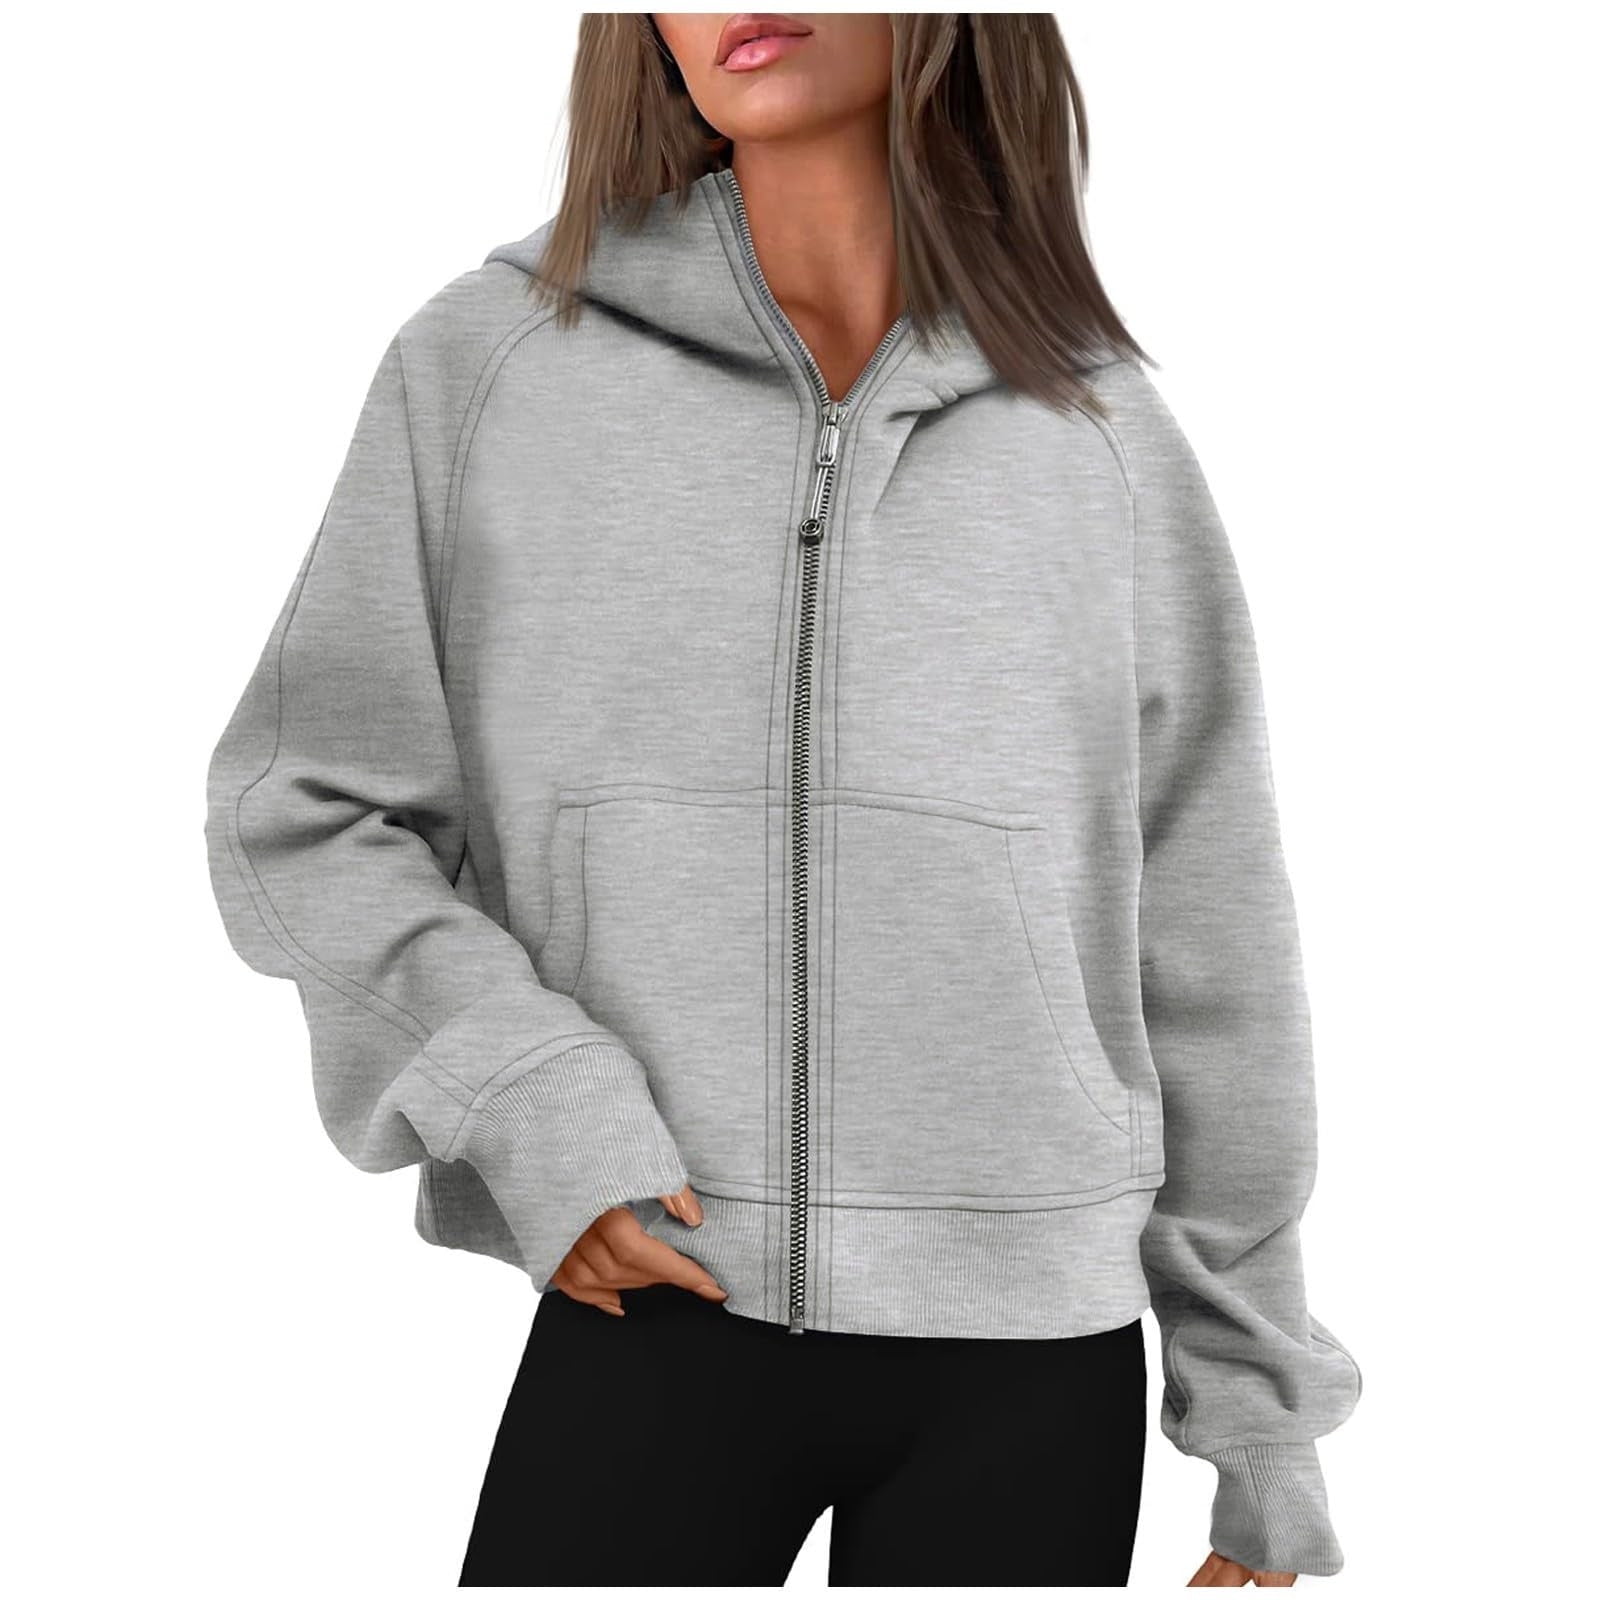 THE GYM PEOPLE Women's Zip Up Plus Oversize Hoodie Drawstring Sweatshirts  Casual Long Sleeve Jacket with Pockets Khaki at  Women's Clothing  store